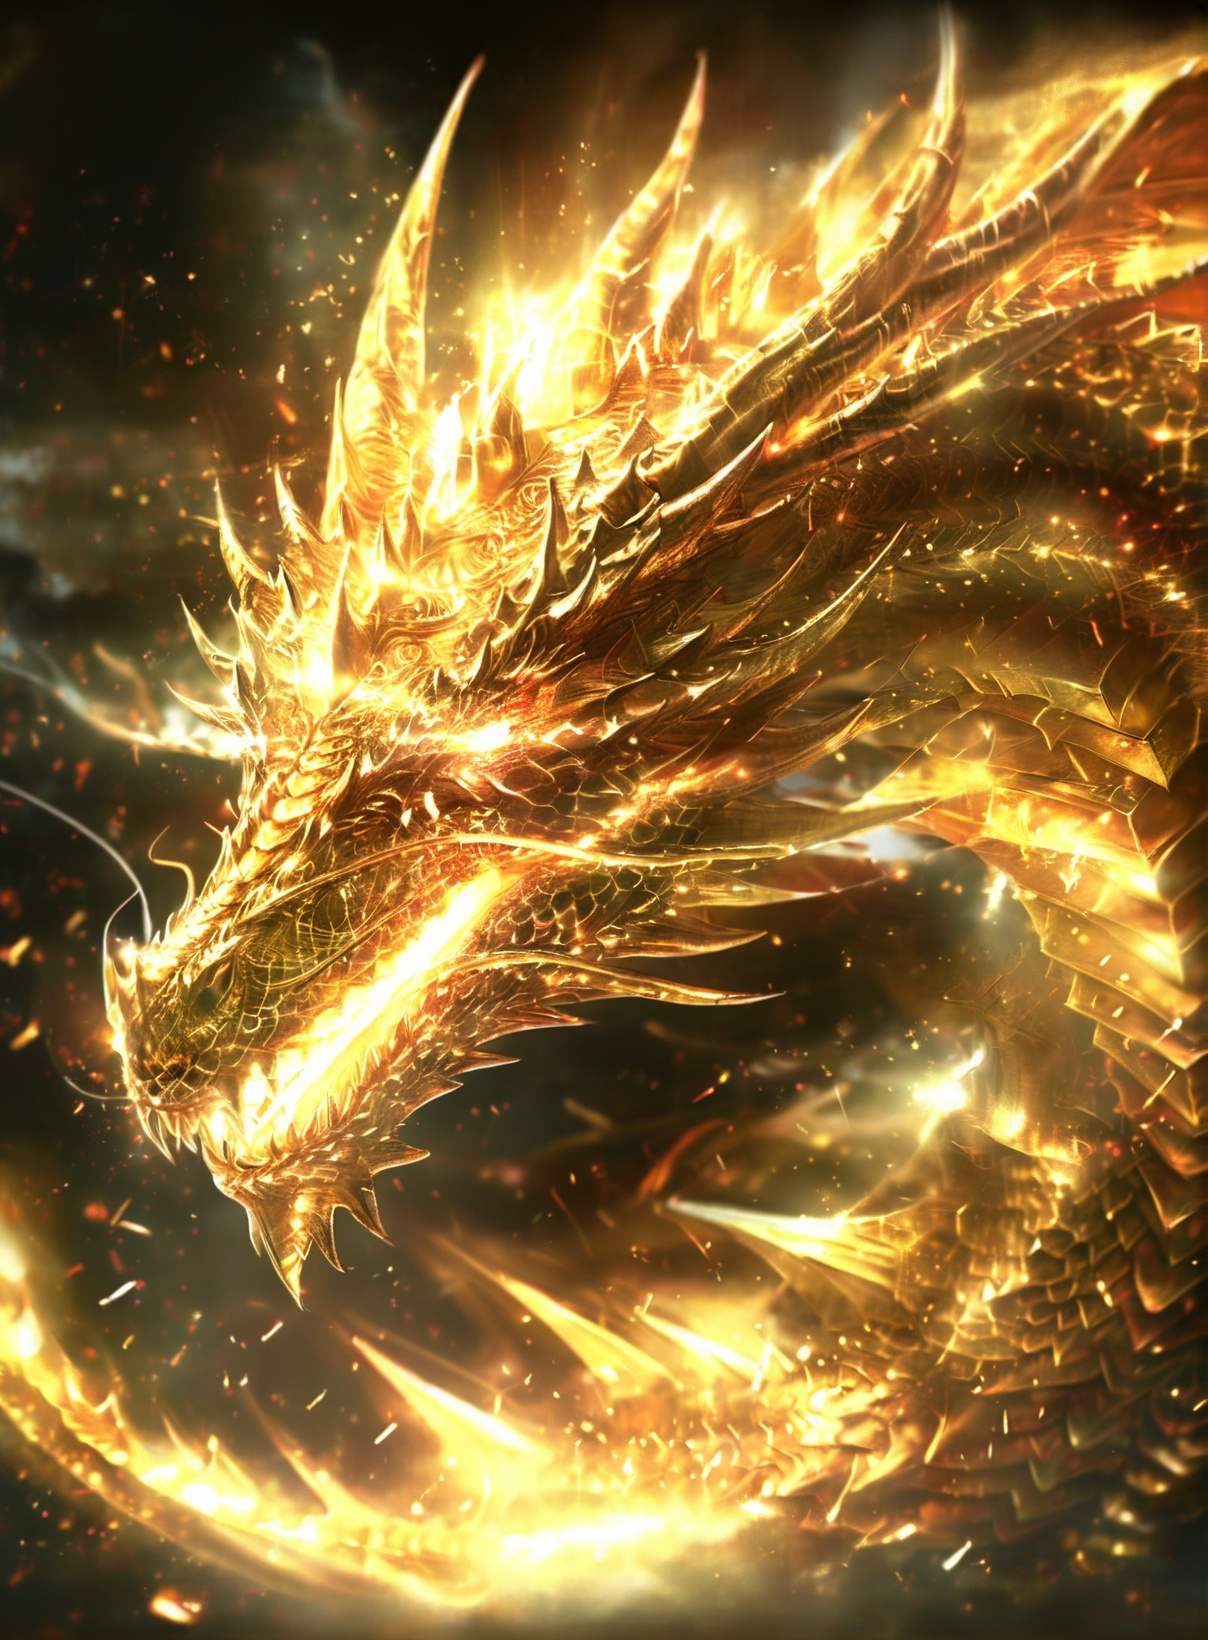 a majestic dragon, seemingly made of a golden or metallic material, with intricate details and patterns. The dragon's scales appear to be shimmering with a golden hue, and its eyes are glowing with a fiery orange-red color. The dragon's mouth is open, revealing sharp teeth, and it seems to be breathing or exhaling, causing a burst of golden sparks to emanate from its nostrils and mouth. The background is dark, with hints of stormy clouds, adding to the dramatic and intense atmosphere of the scene<lora:KING Gardon-000010:1>